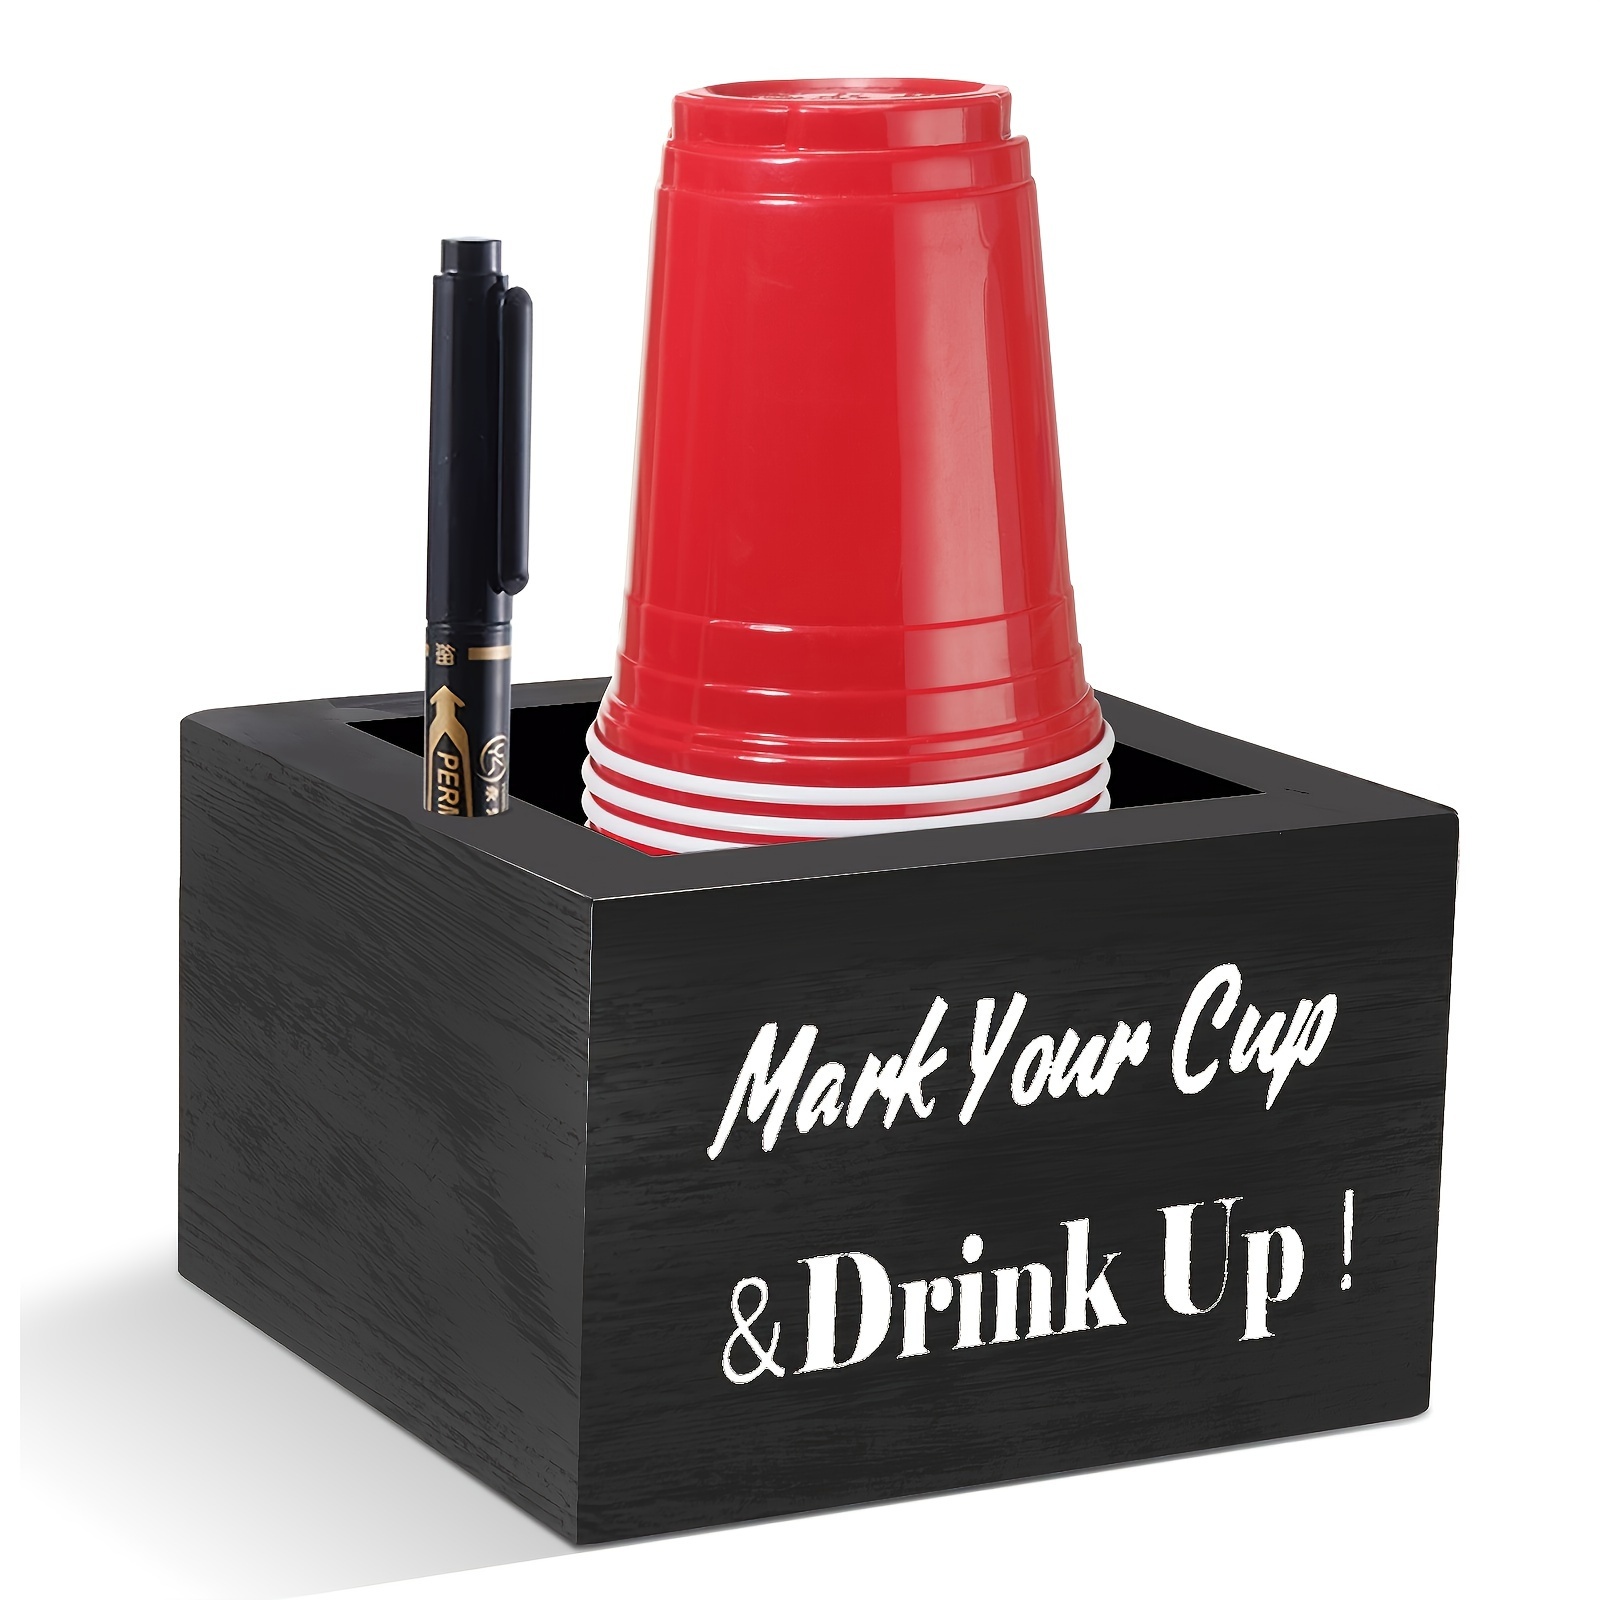 

1pc Wooden Party Cup Holder - Party Cup Holder With Marker Slot, Solo Cup Holder For Party And Wedding, Rustic Disposable Cup Holder For Bar, Kitchen, Countertop, Practical Party Convenient Supplies